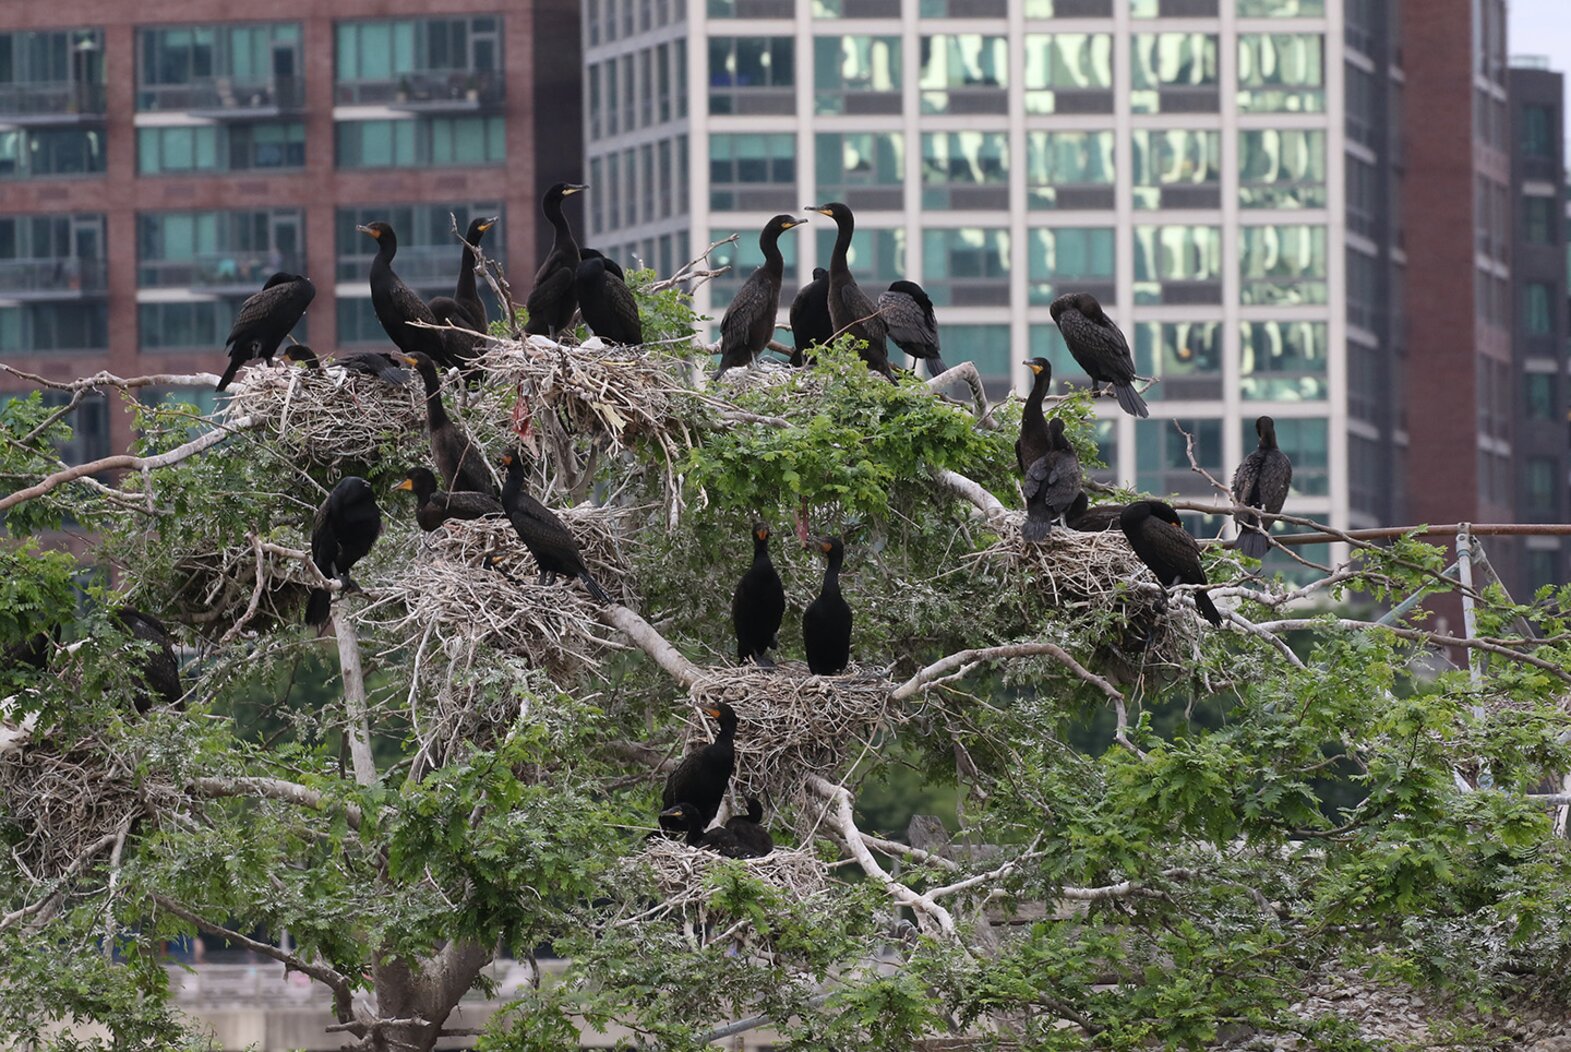 A close-up of Double-crested Cormorants nesting on U Thant Island, which lies between Roosevelt Island and Manhattan. Photo: Don Riepe